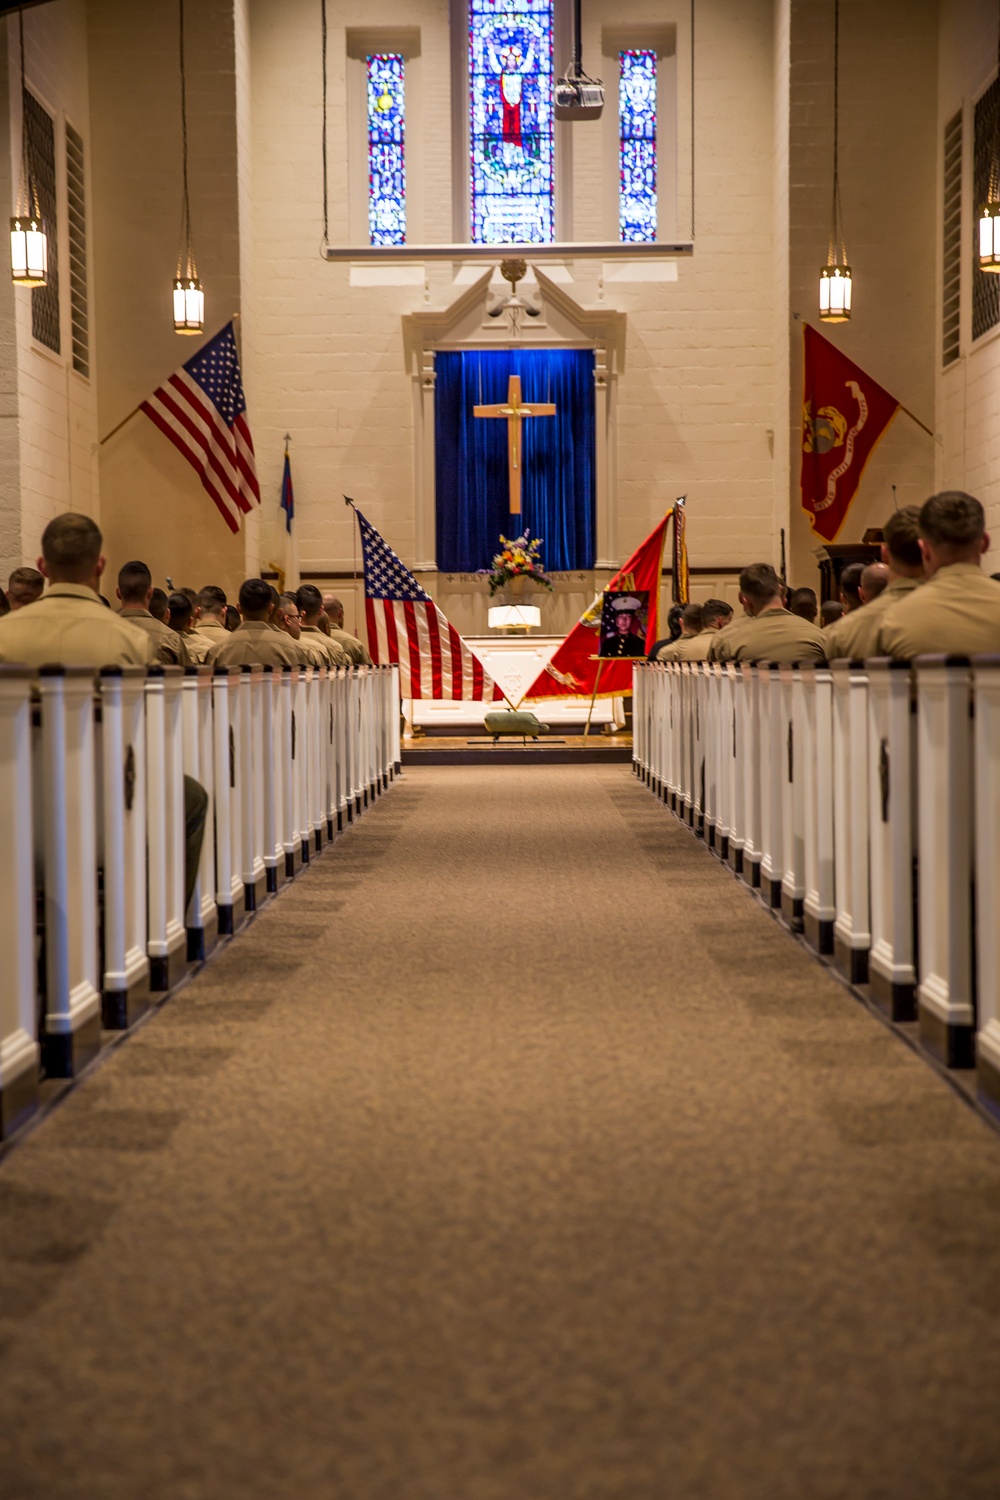 1st Bn., 6th Marines pay respects to fallen brother